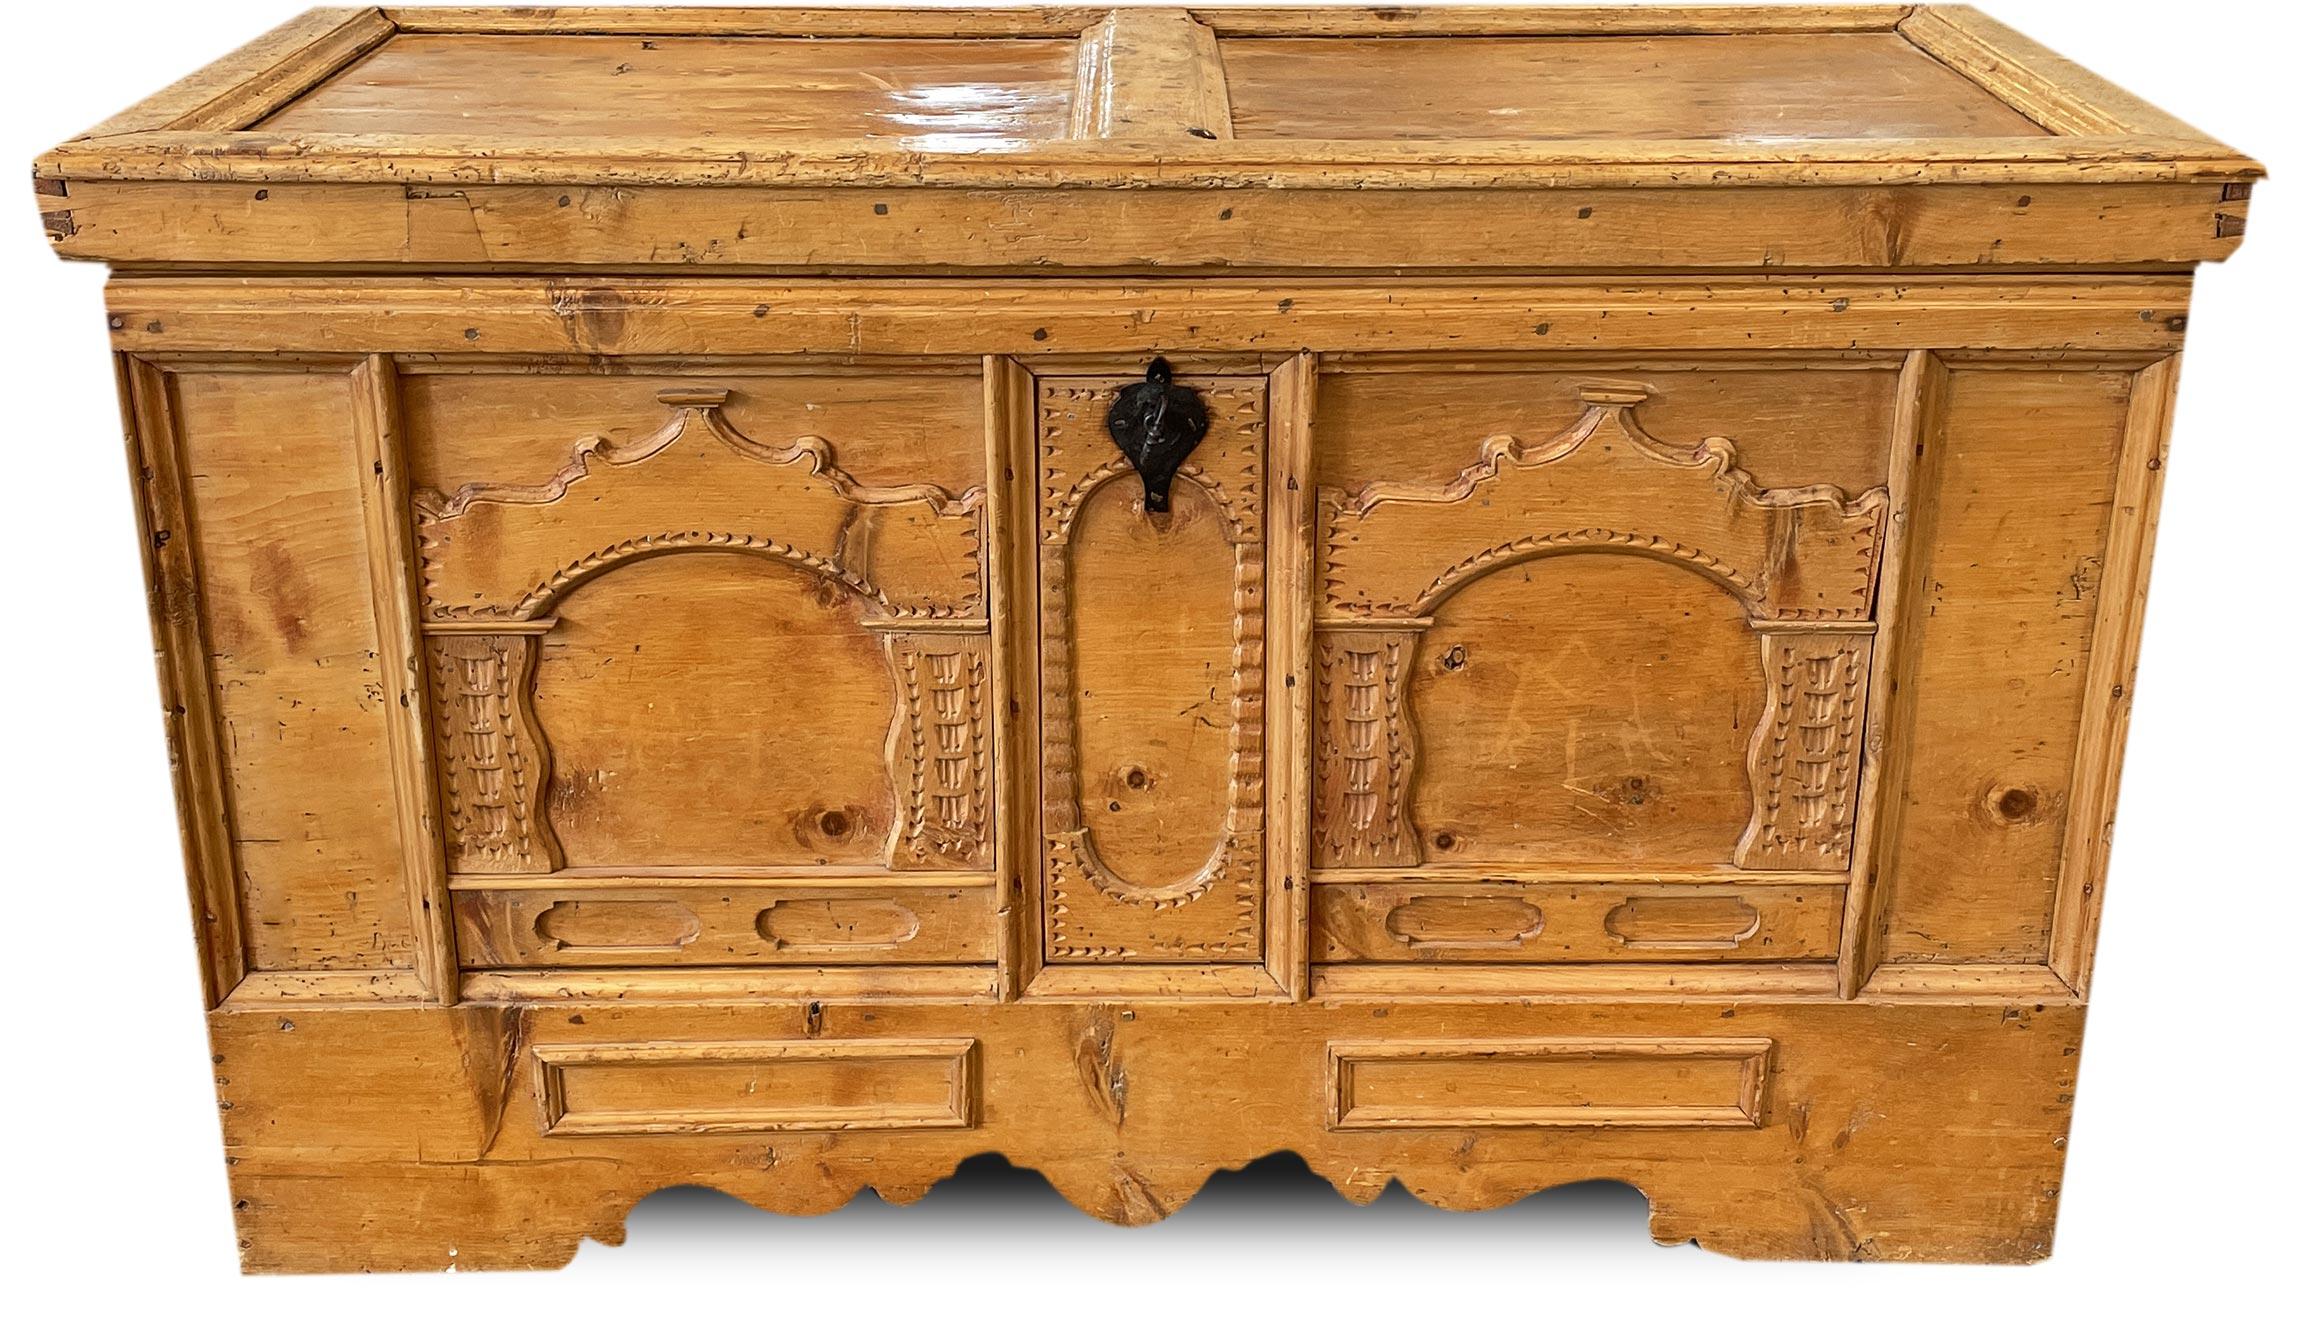 Late 18th century Swiss stone pine chest

H. 88 cm – L. 145 cm – D. 69 cm

Beautiful chest in pine wood, built at the end of the eighteenth century.
On the front there are three framed vertical pilasters. The central one is characterized by an